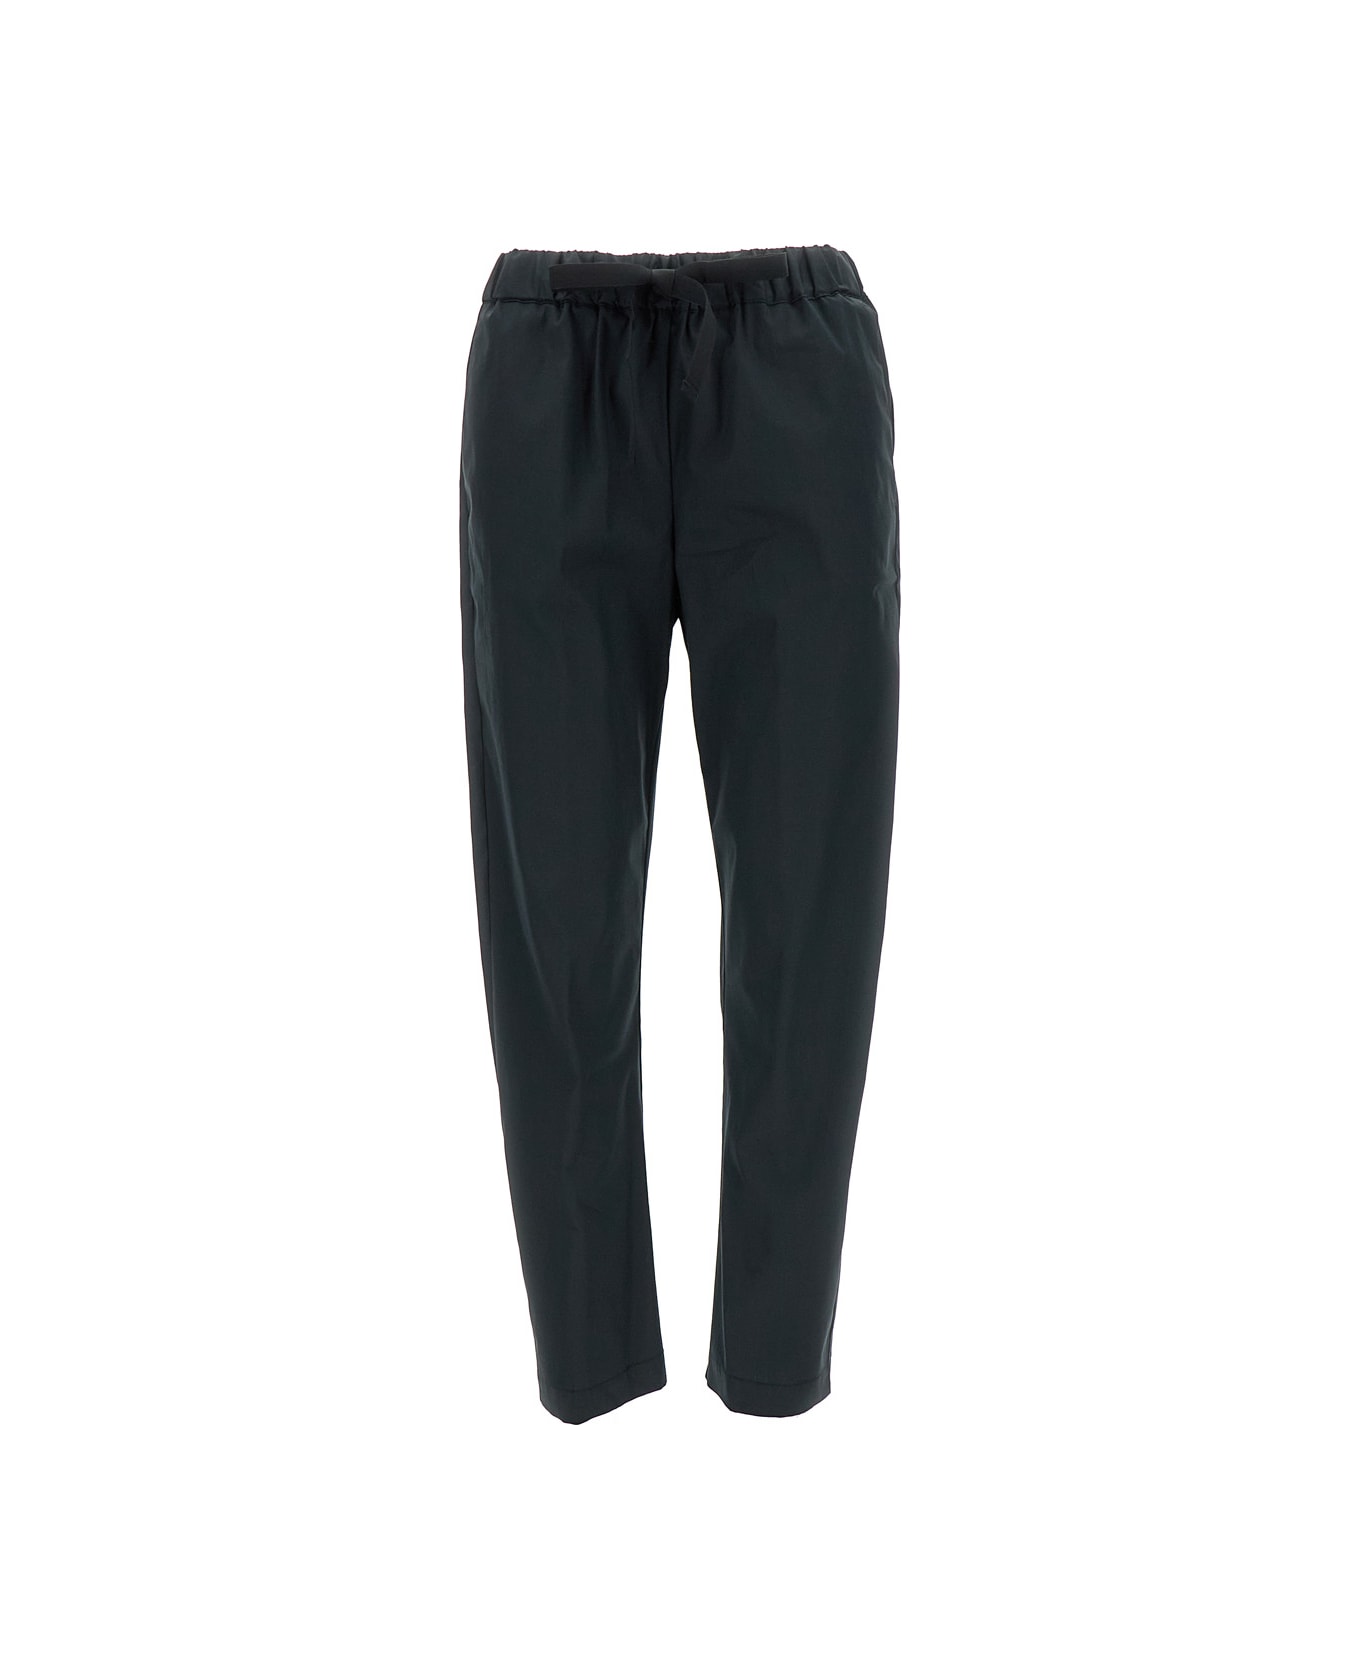 SEMICOUTURE Black Crop Cut Pants In Cotton Blend Woman - Black ボトムス